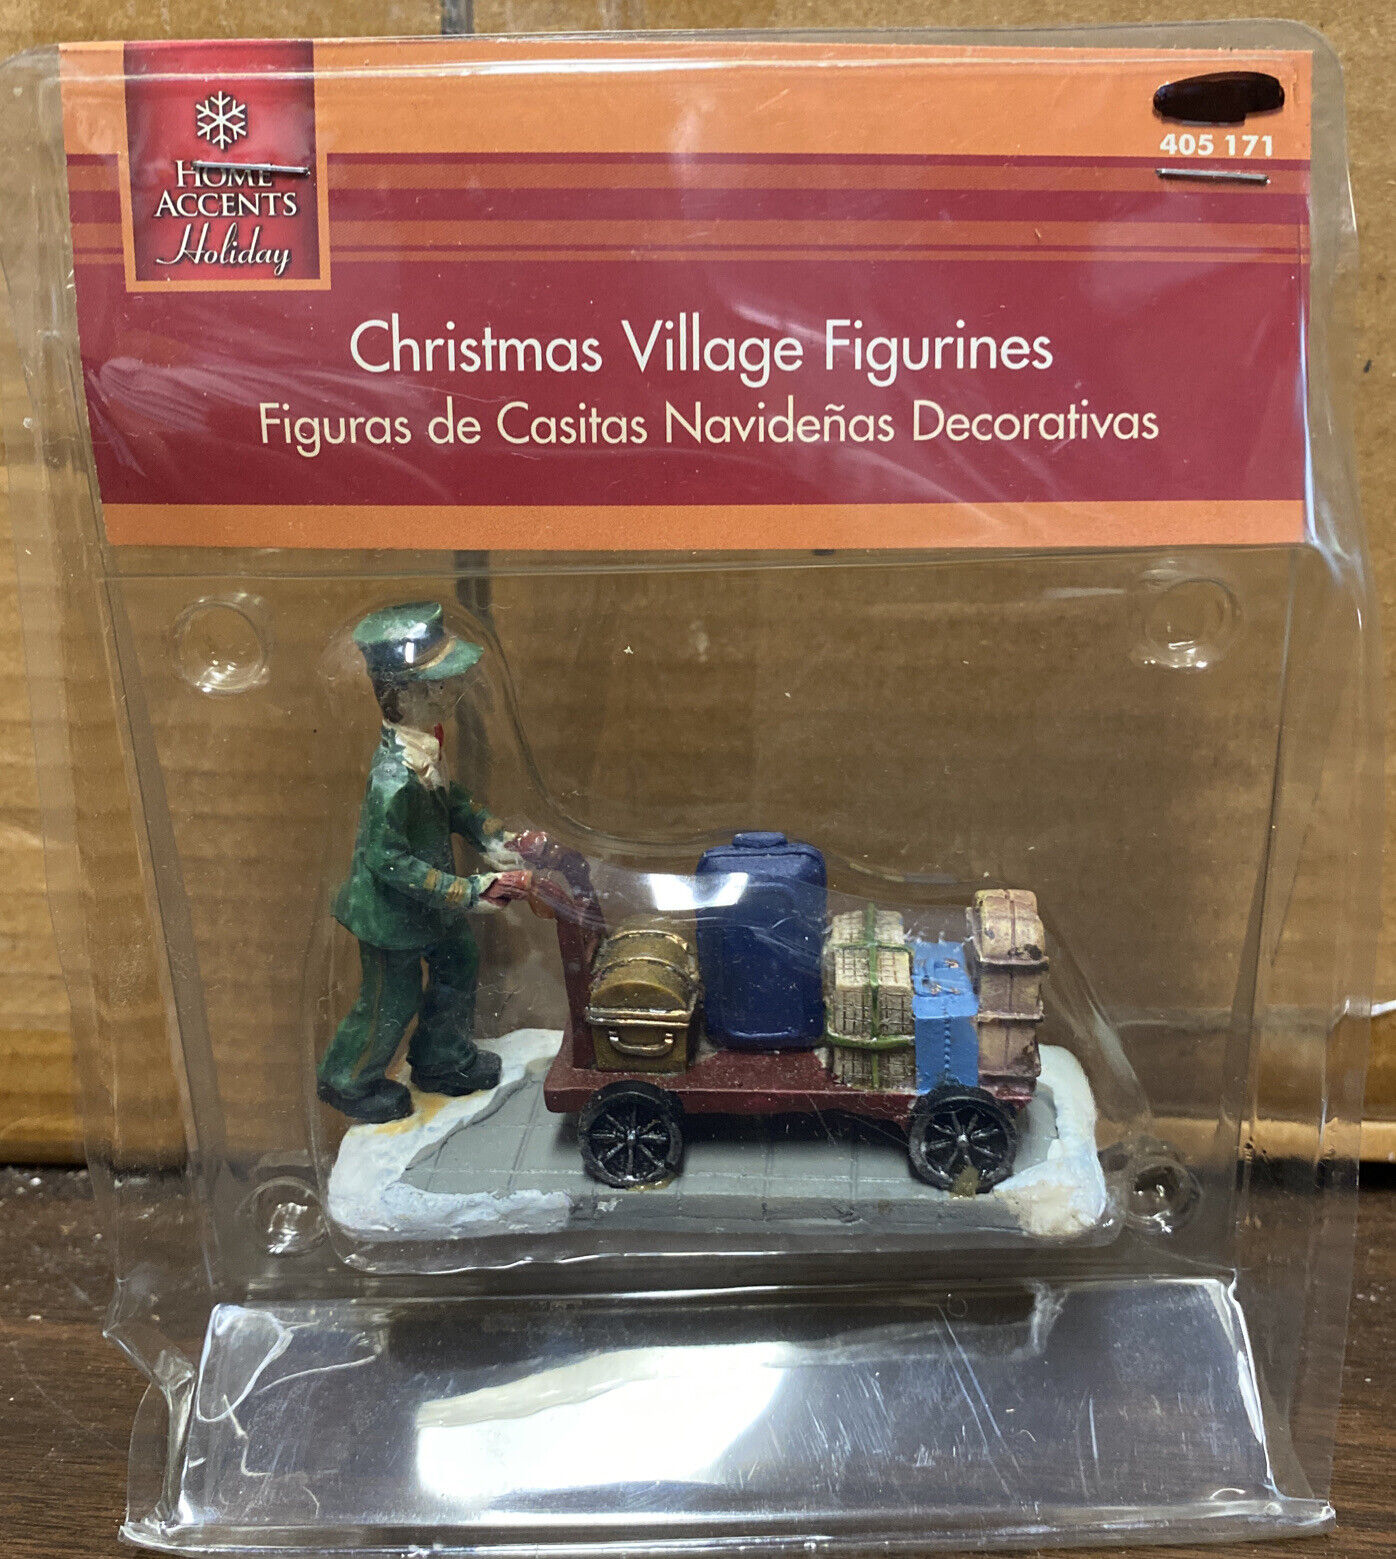 Home Accents Holiday Christmas Village Figurines